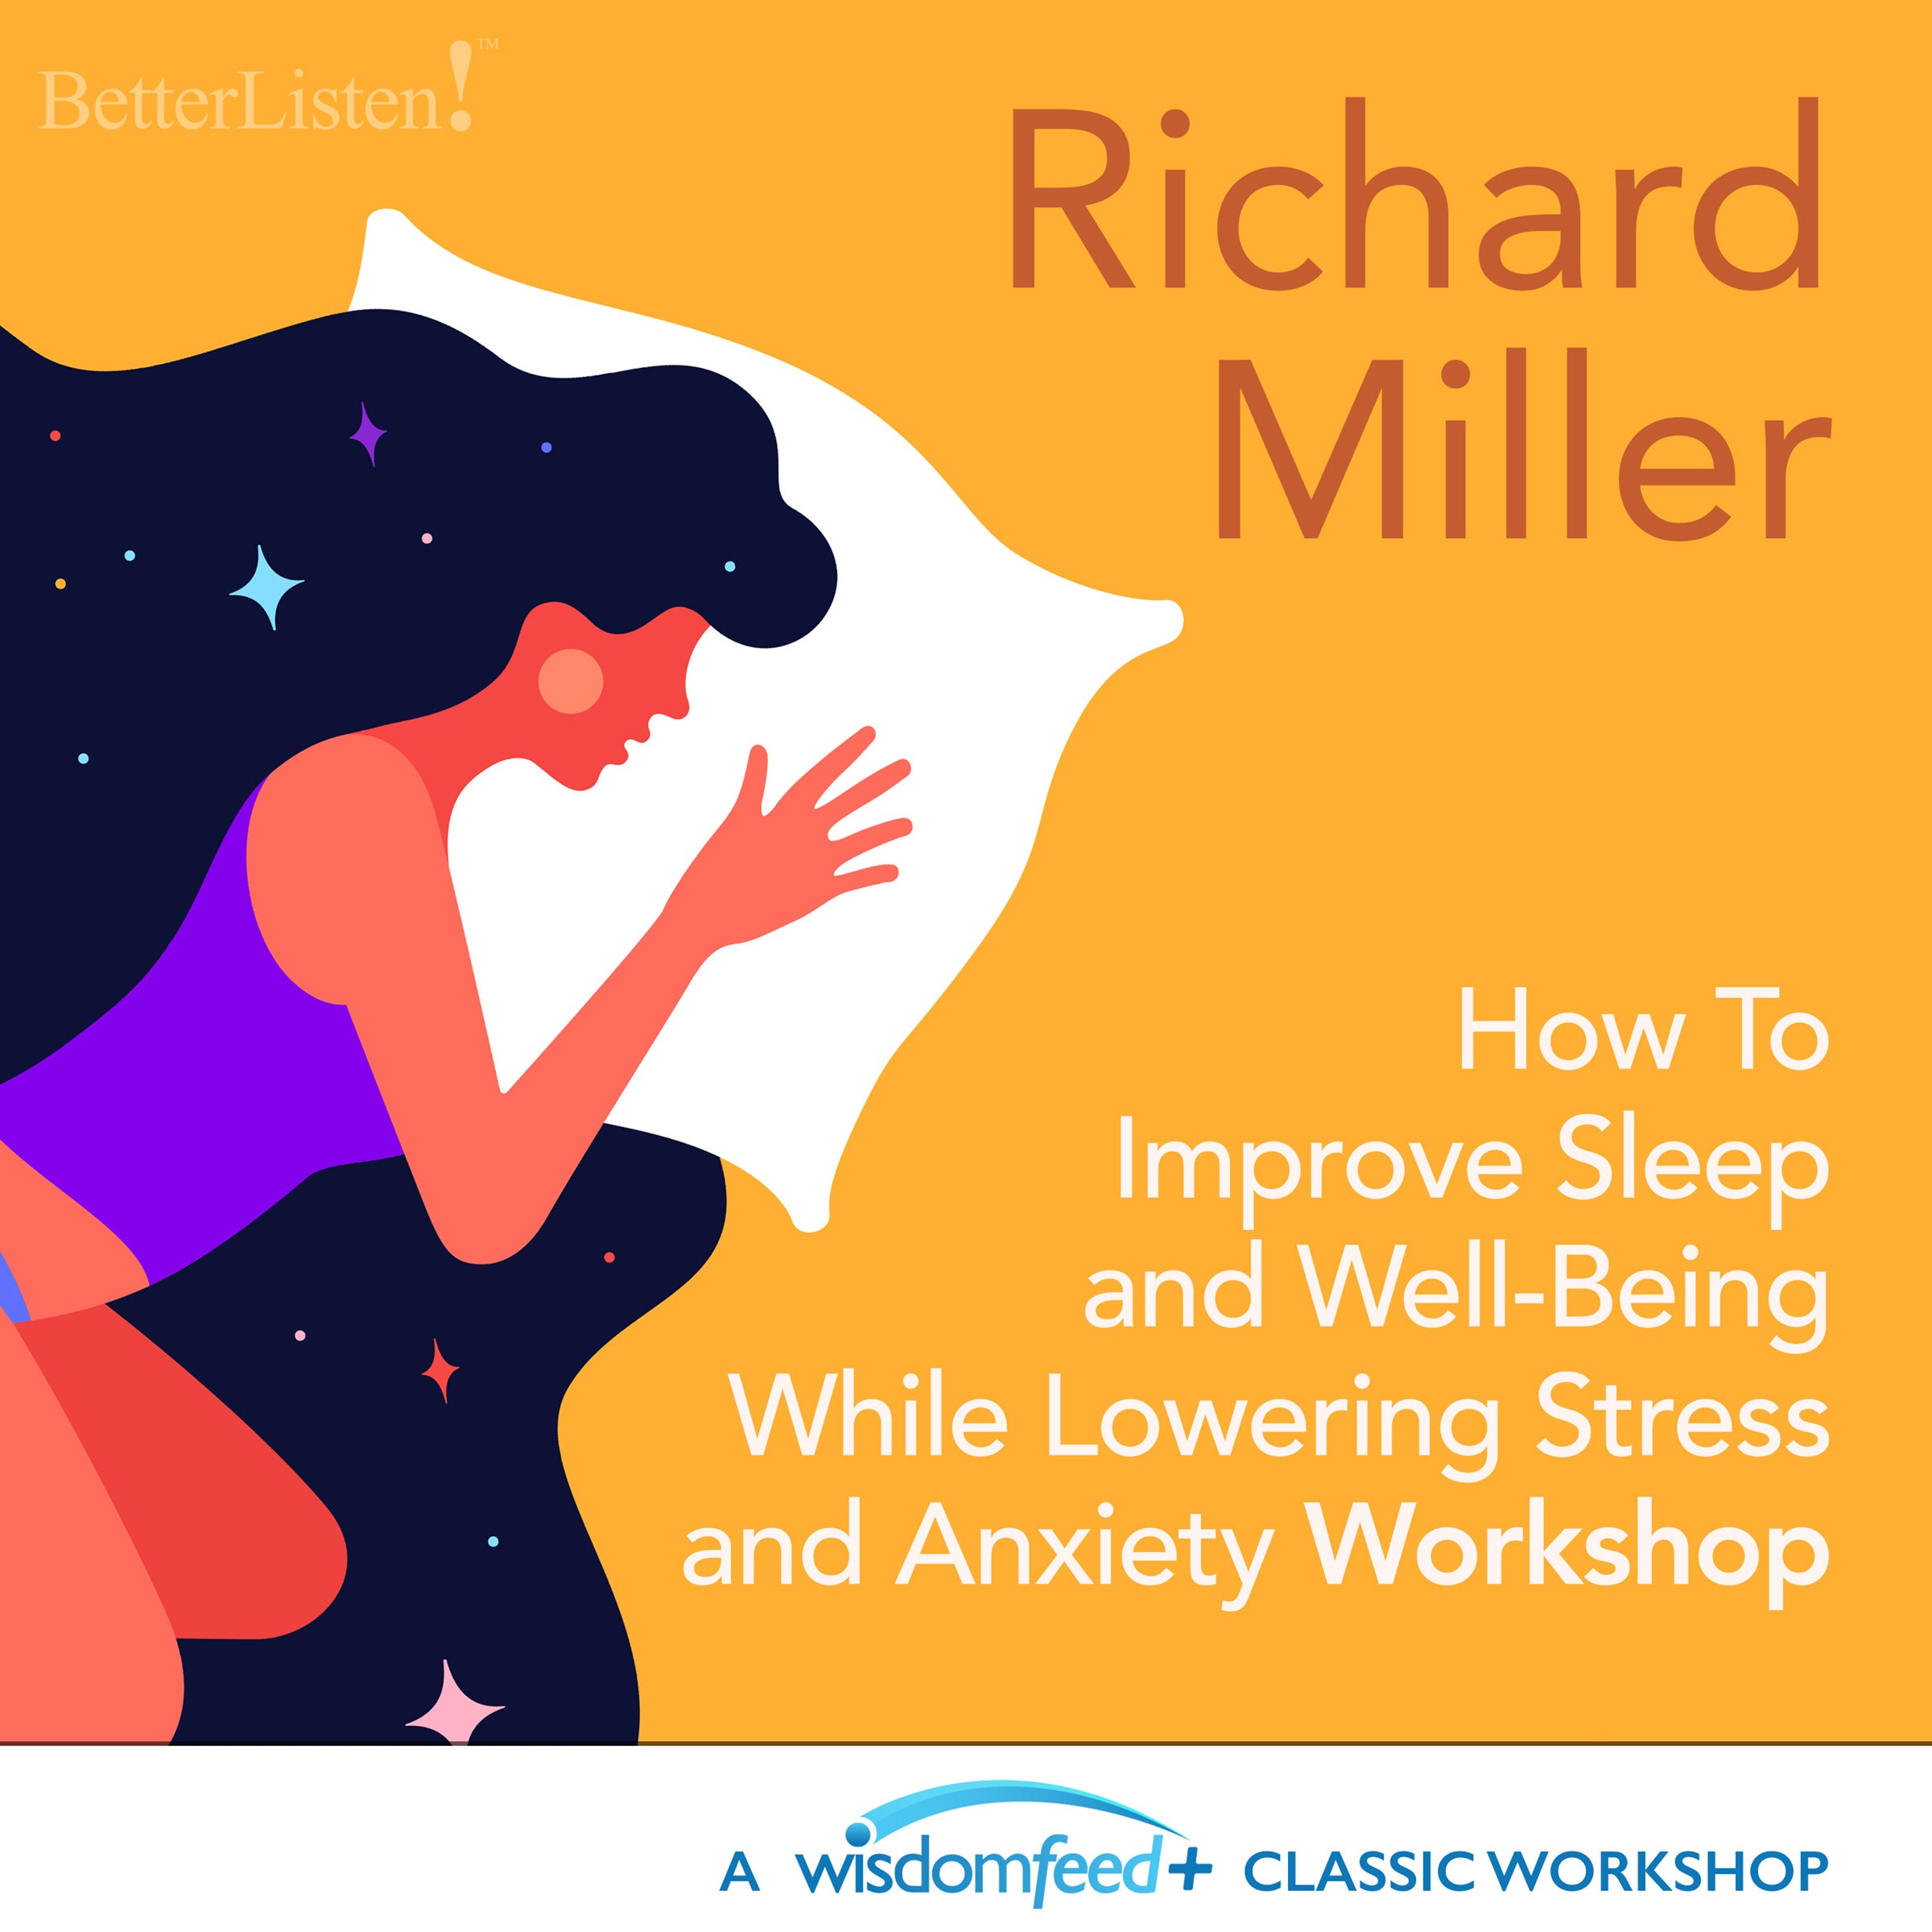 Sleep Masterclass - How To Improve Sleep and Well Being While Lowering Stress and Anxiety with Richard Miller Video ad Audio